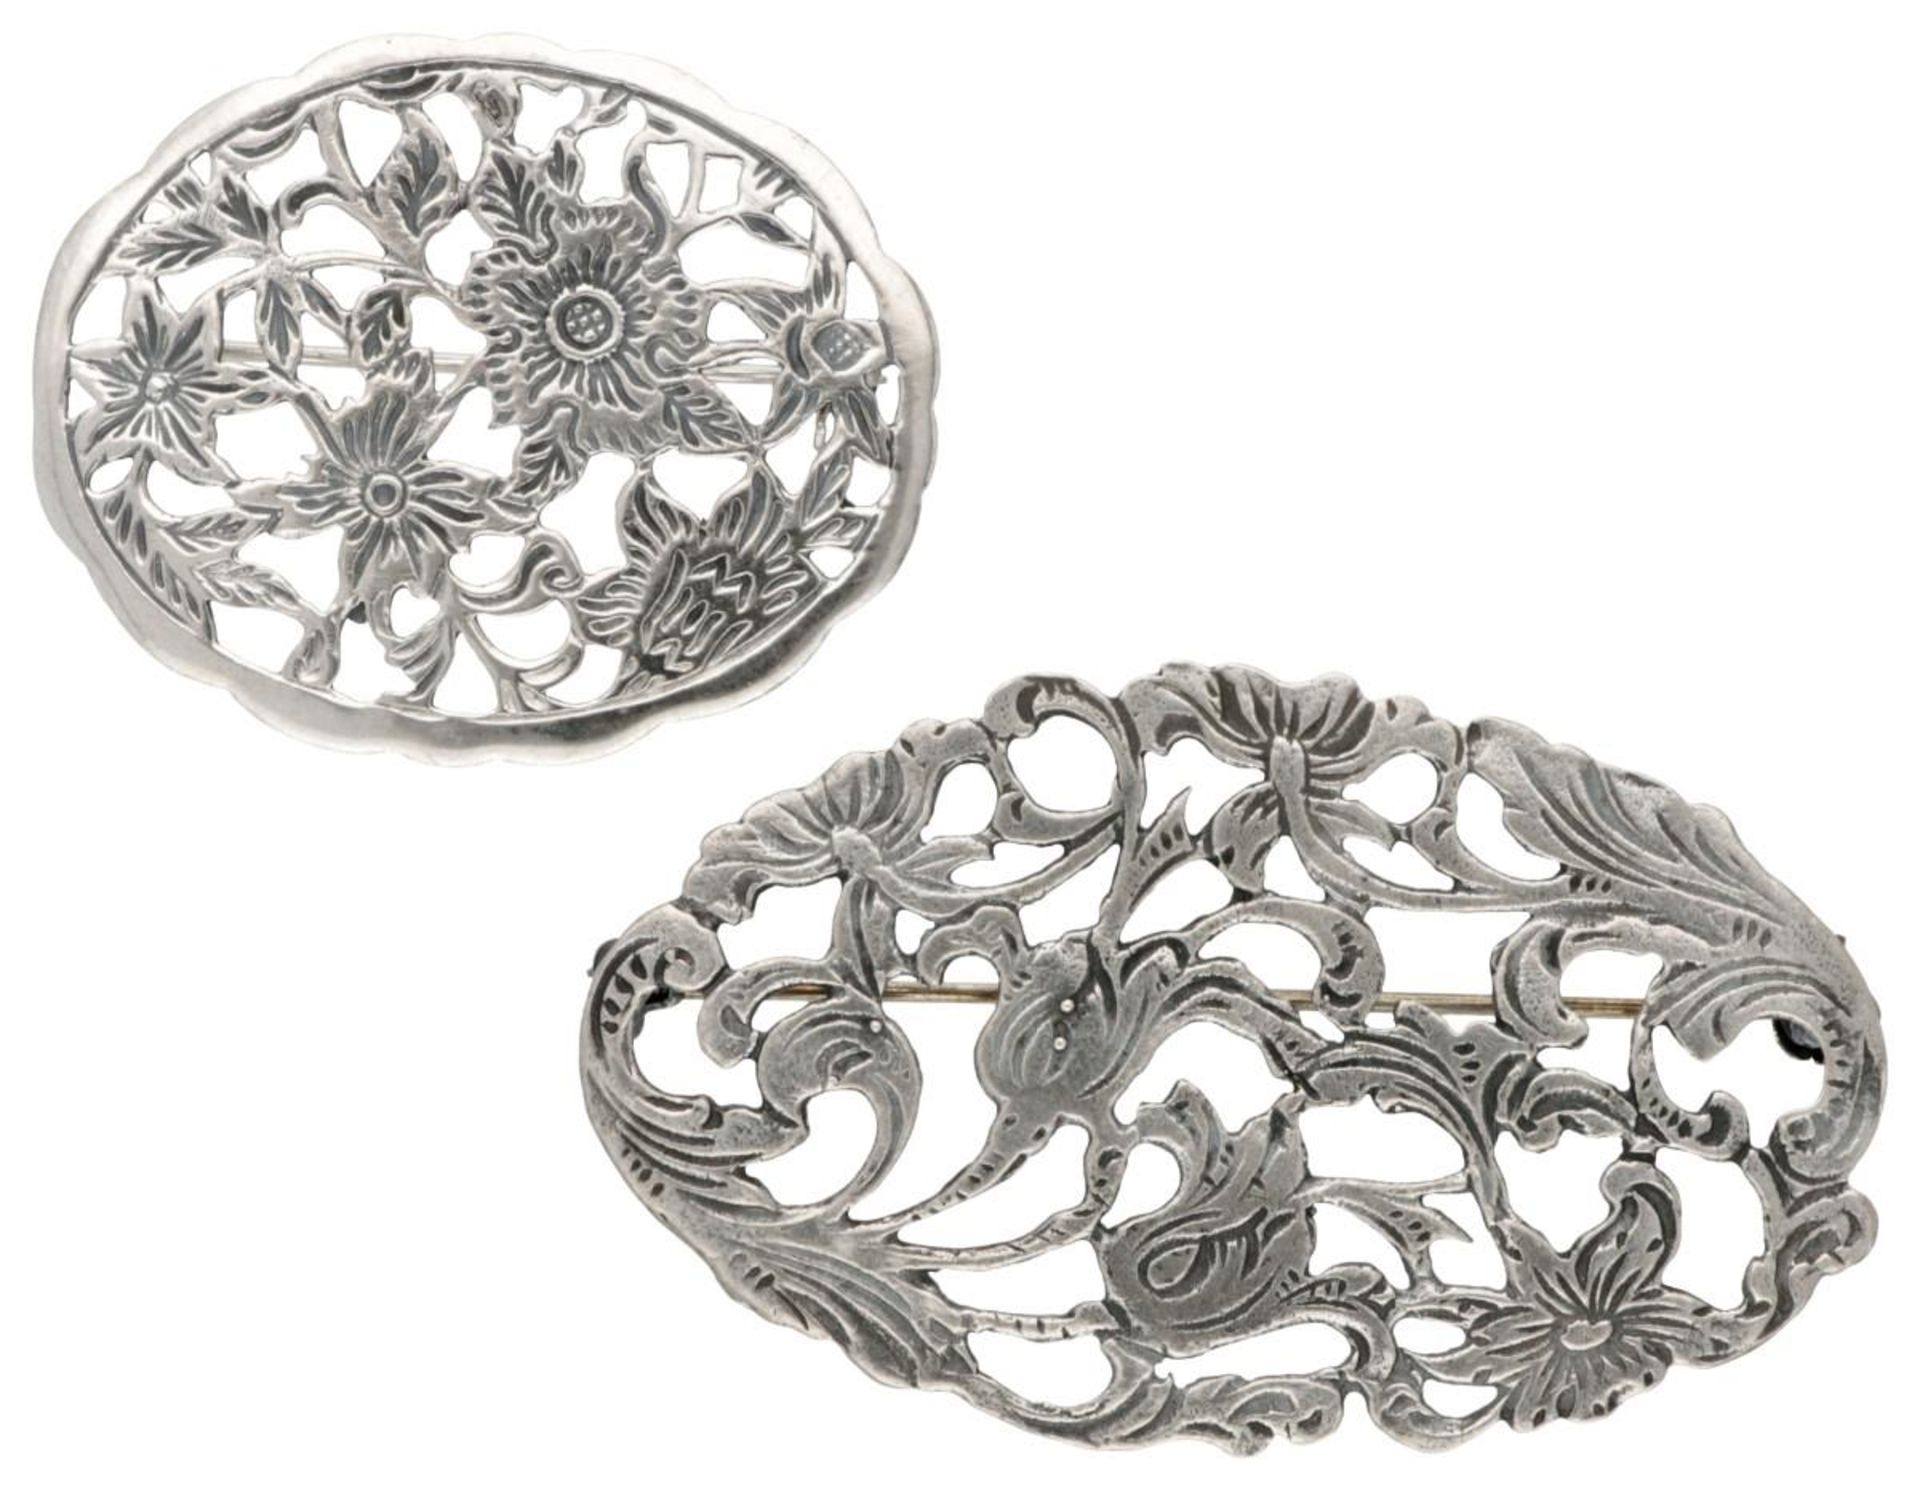 Lot of two sterling silver vintage brooches with floral details.